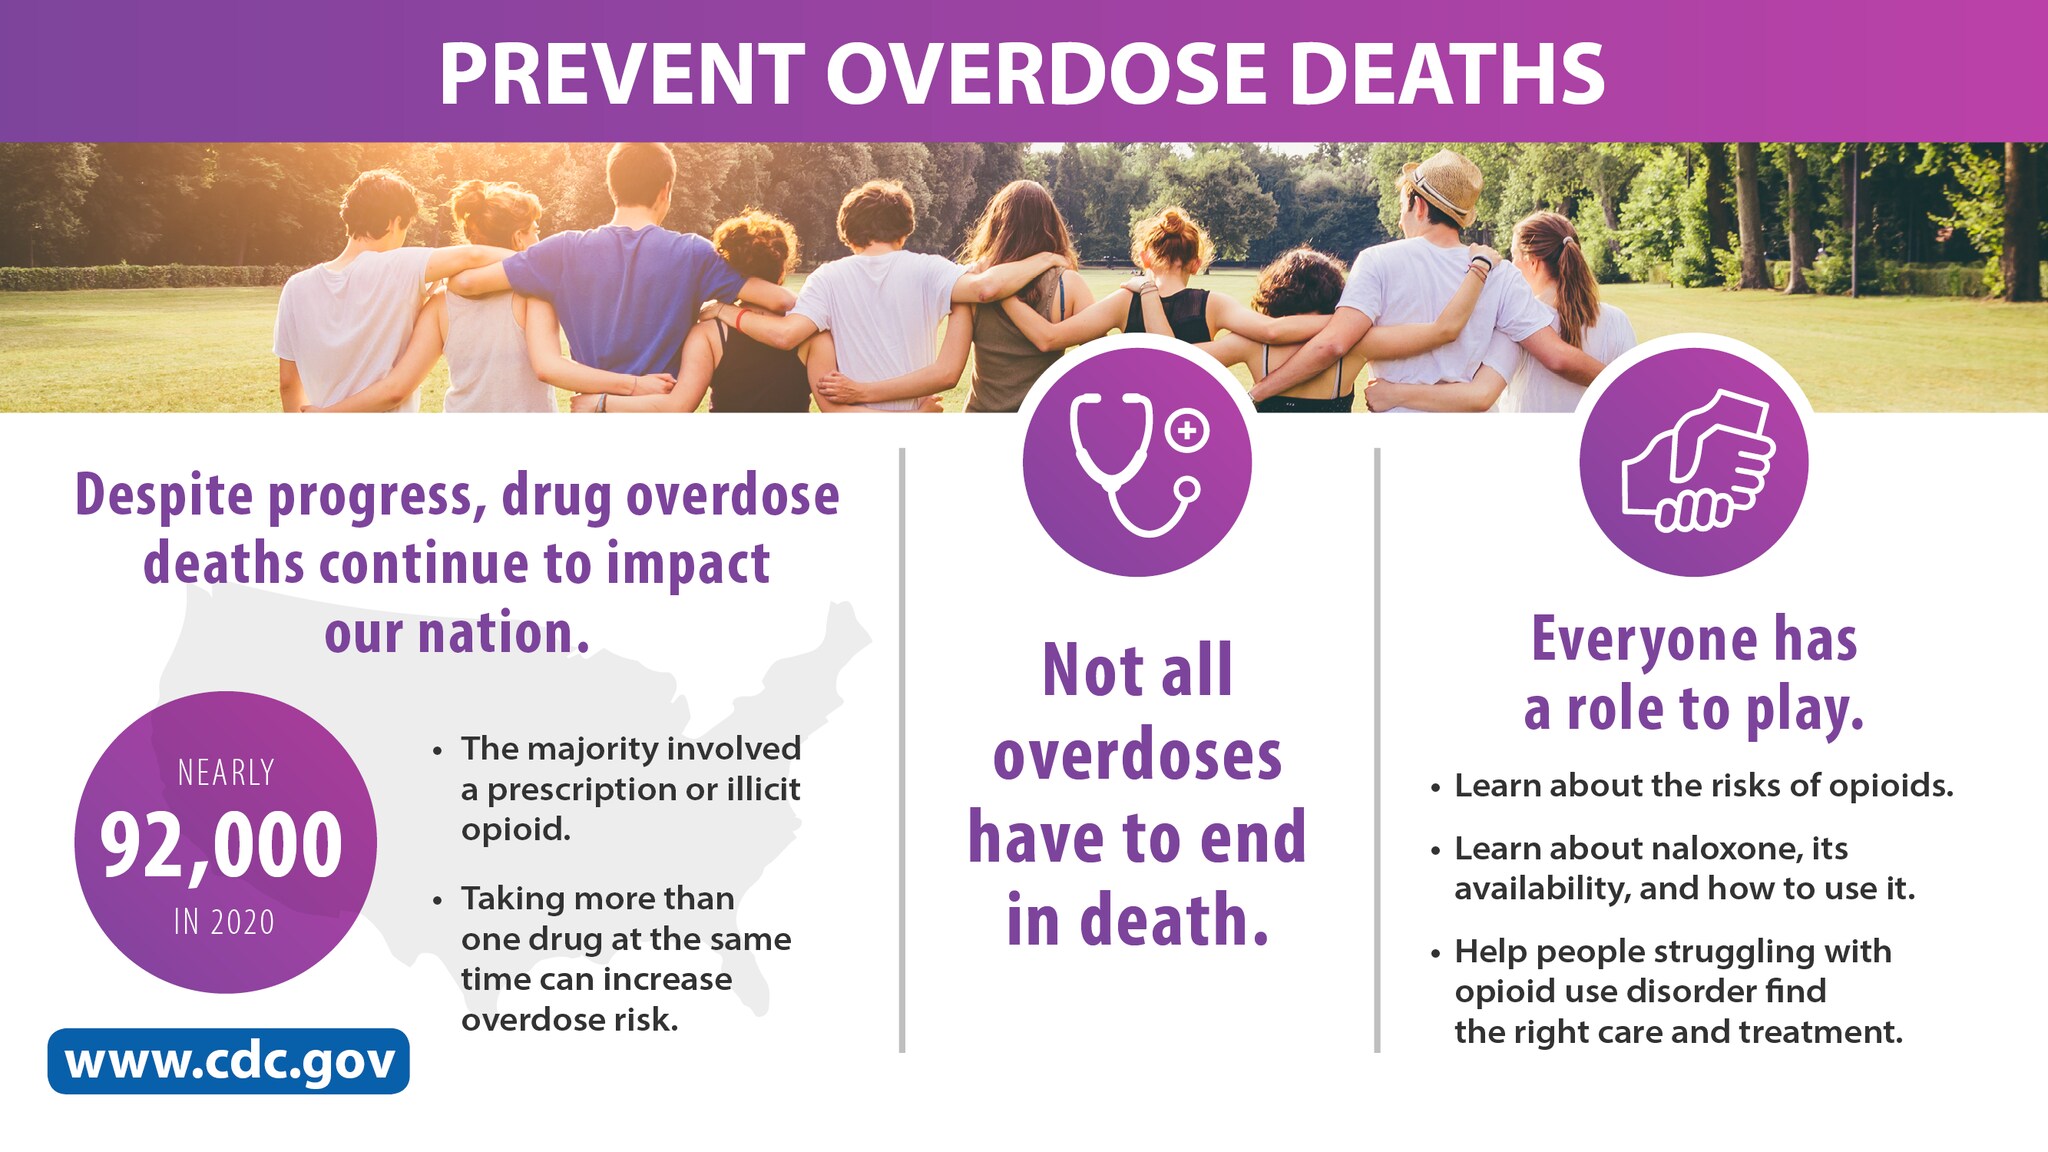 Prevent Overdose Deaths: Despite progress, drug overdose deaths continue to impact our nation. Not all overdoses have to end